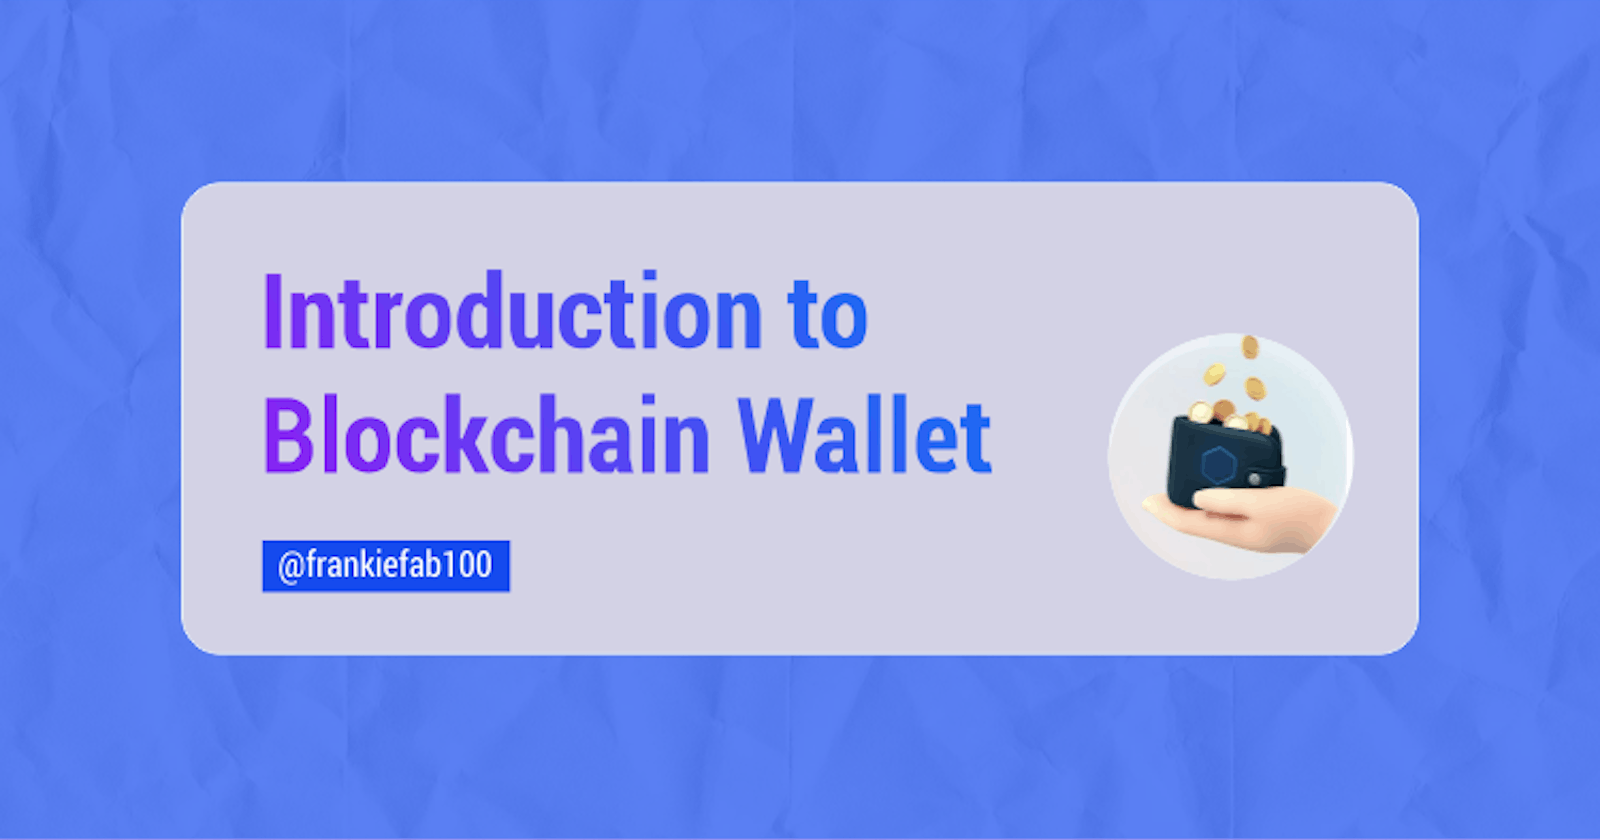 Introduction to Blockchain Wallet